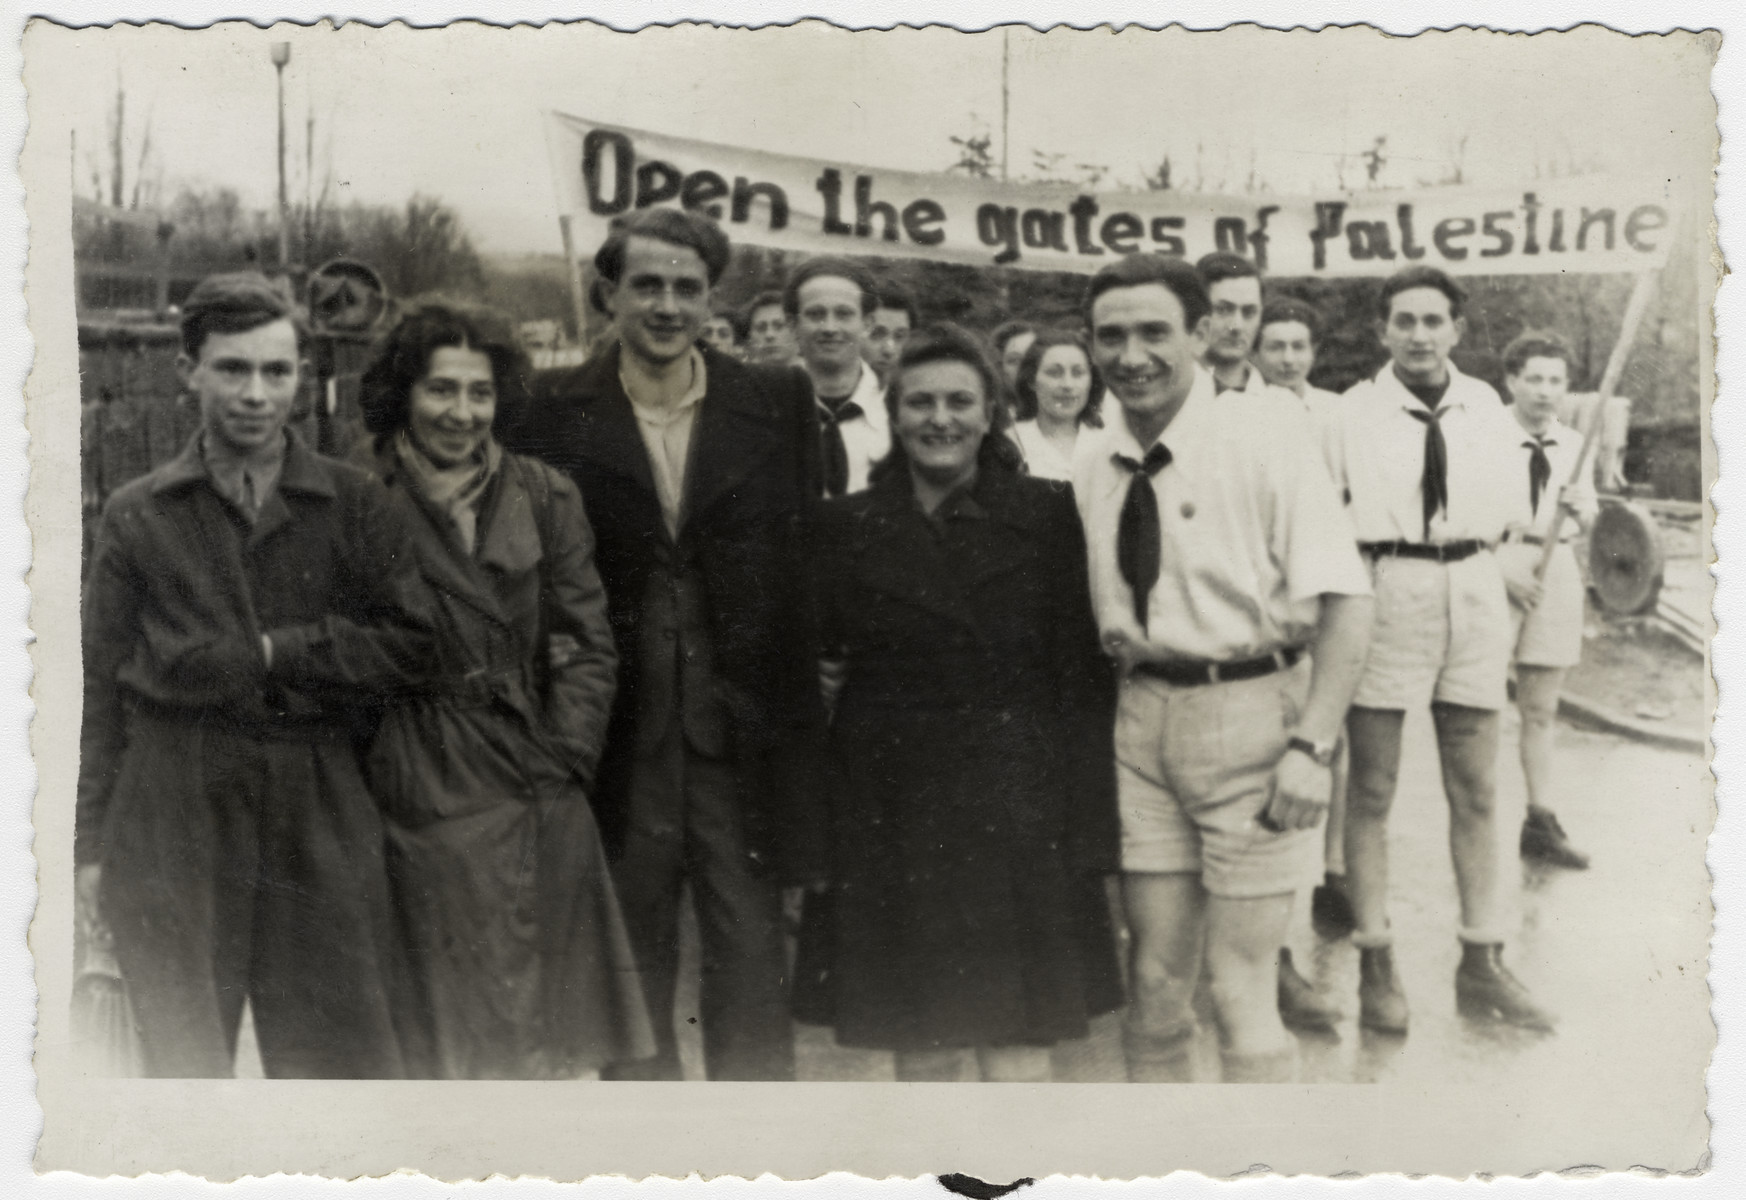 Members of Kibbutz Havivah Reik demonstrate against British Palestine immigration policy.

In the background is a banner that says, "Open the gates of Palestine."  Willy Bogler is standing in the center.